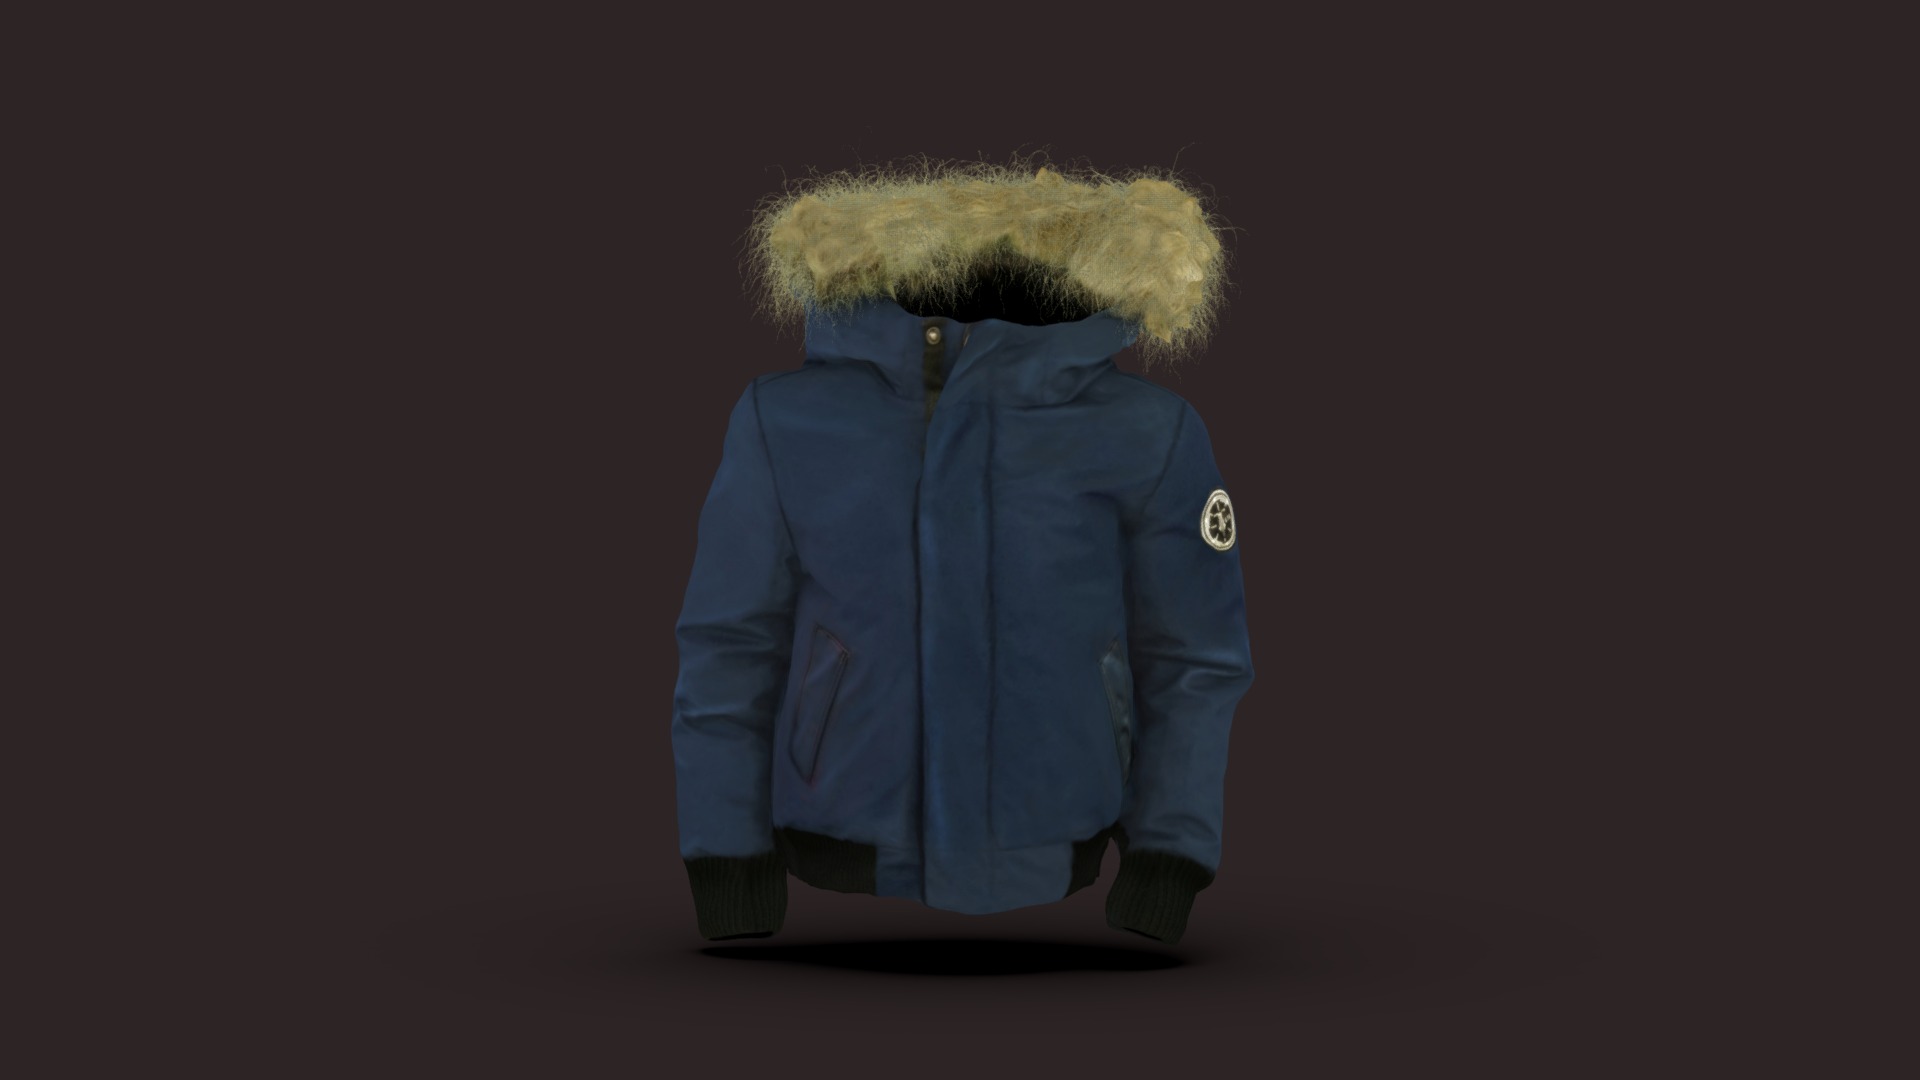 3D model TEST2 - This is a 3D model of the TEST2. The 3D model is about a person wearing a blue jacket.